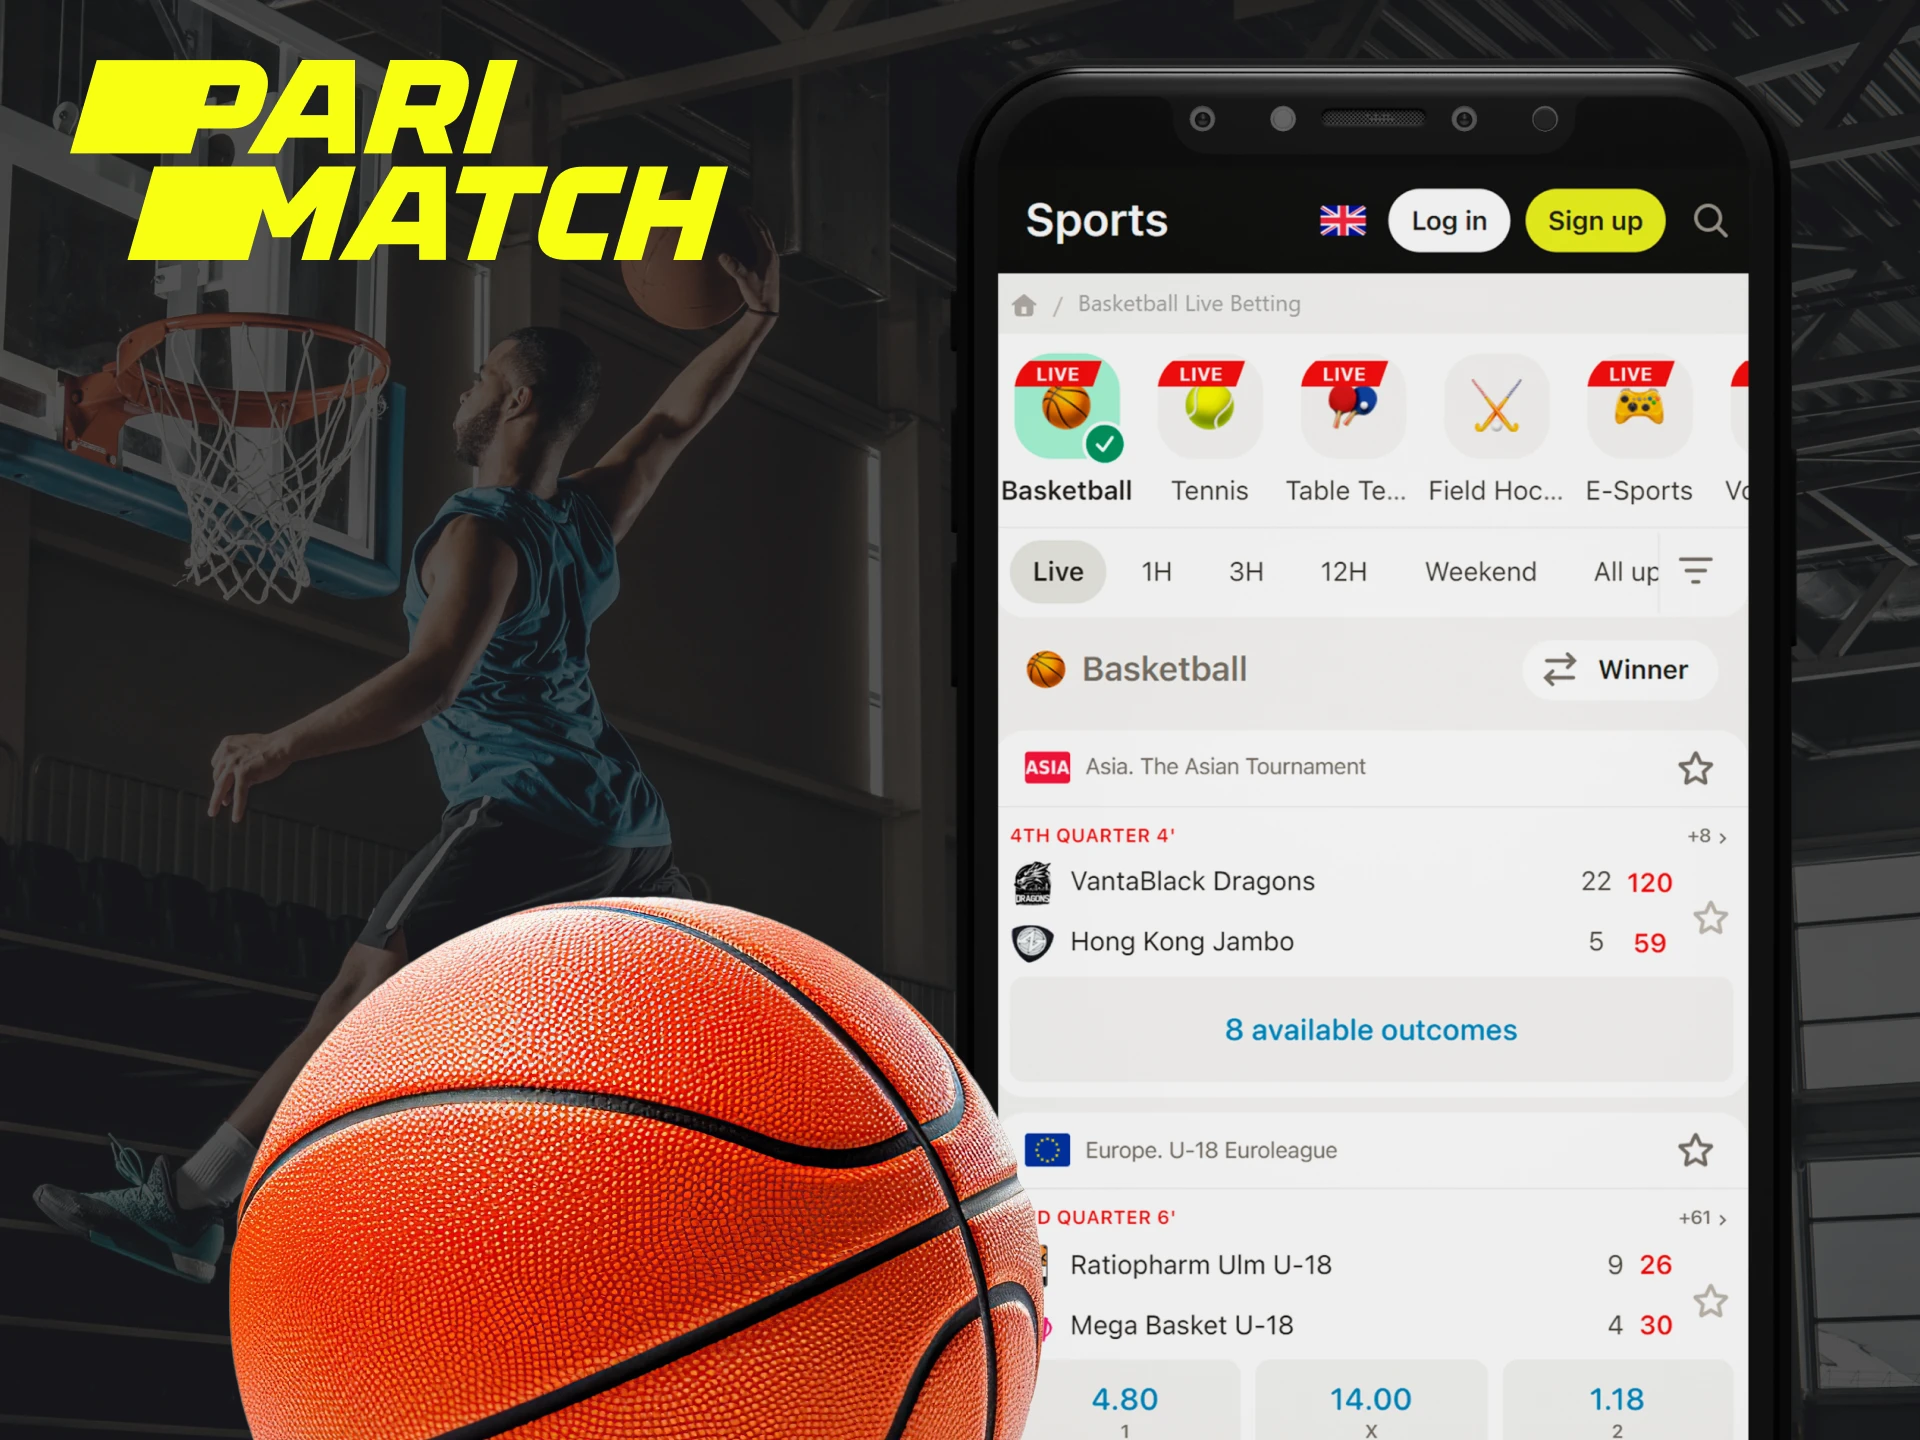 The Parimatch app has high odds for betting on basketball.